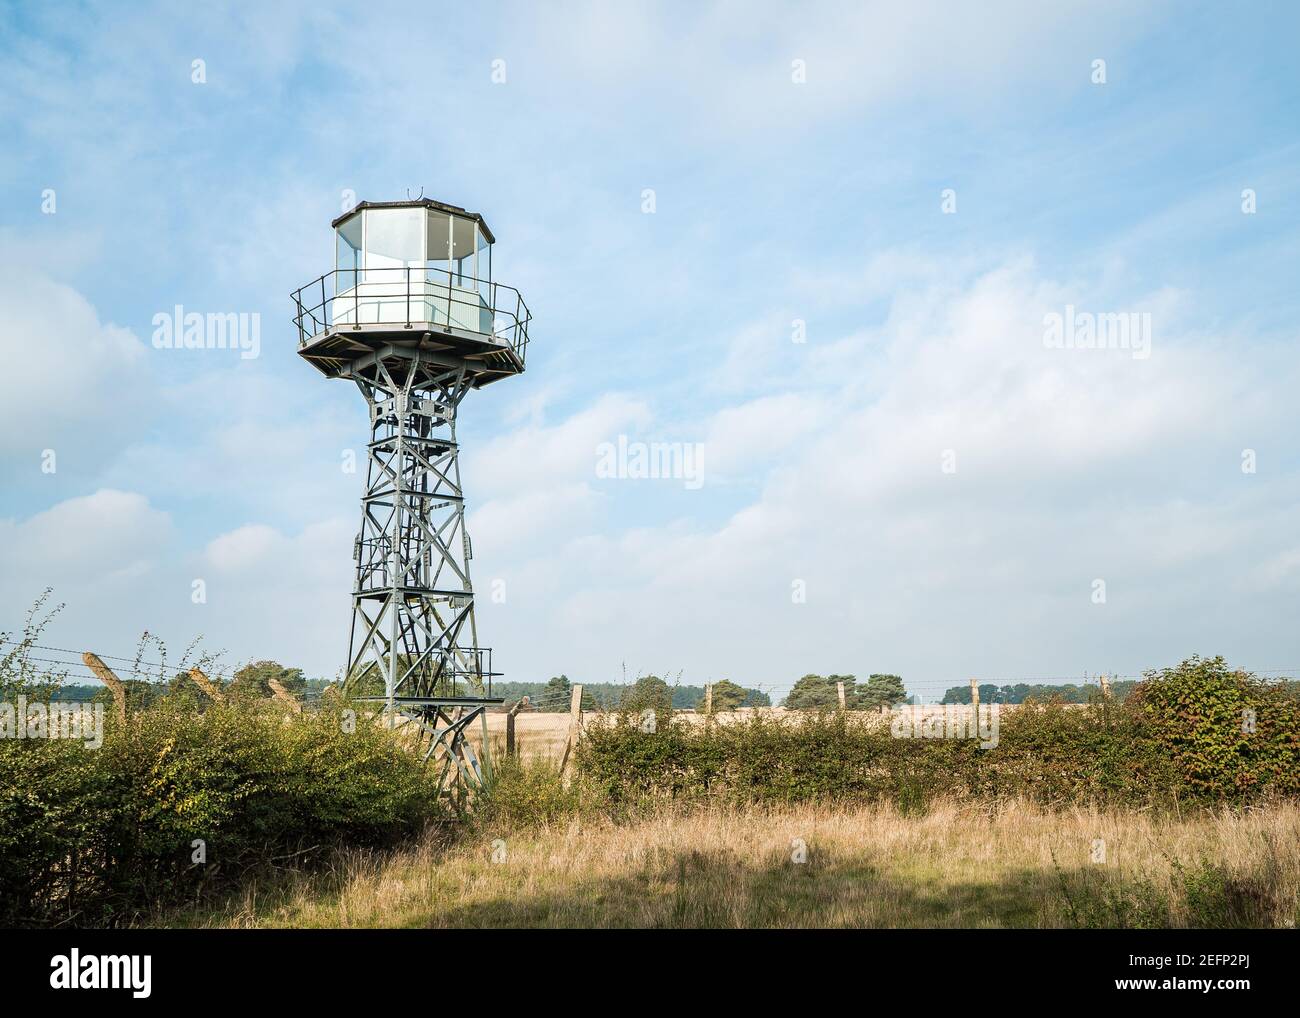 Cold War steel British military lookout tower with glass windows based at decommissioned abandoned old nuclear weapons site Stock Photo